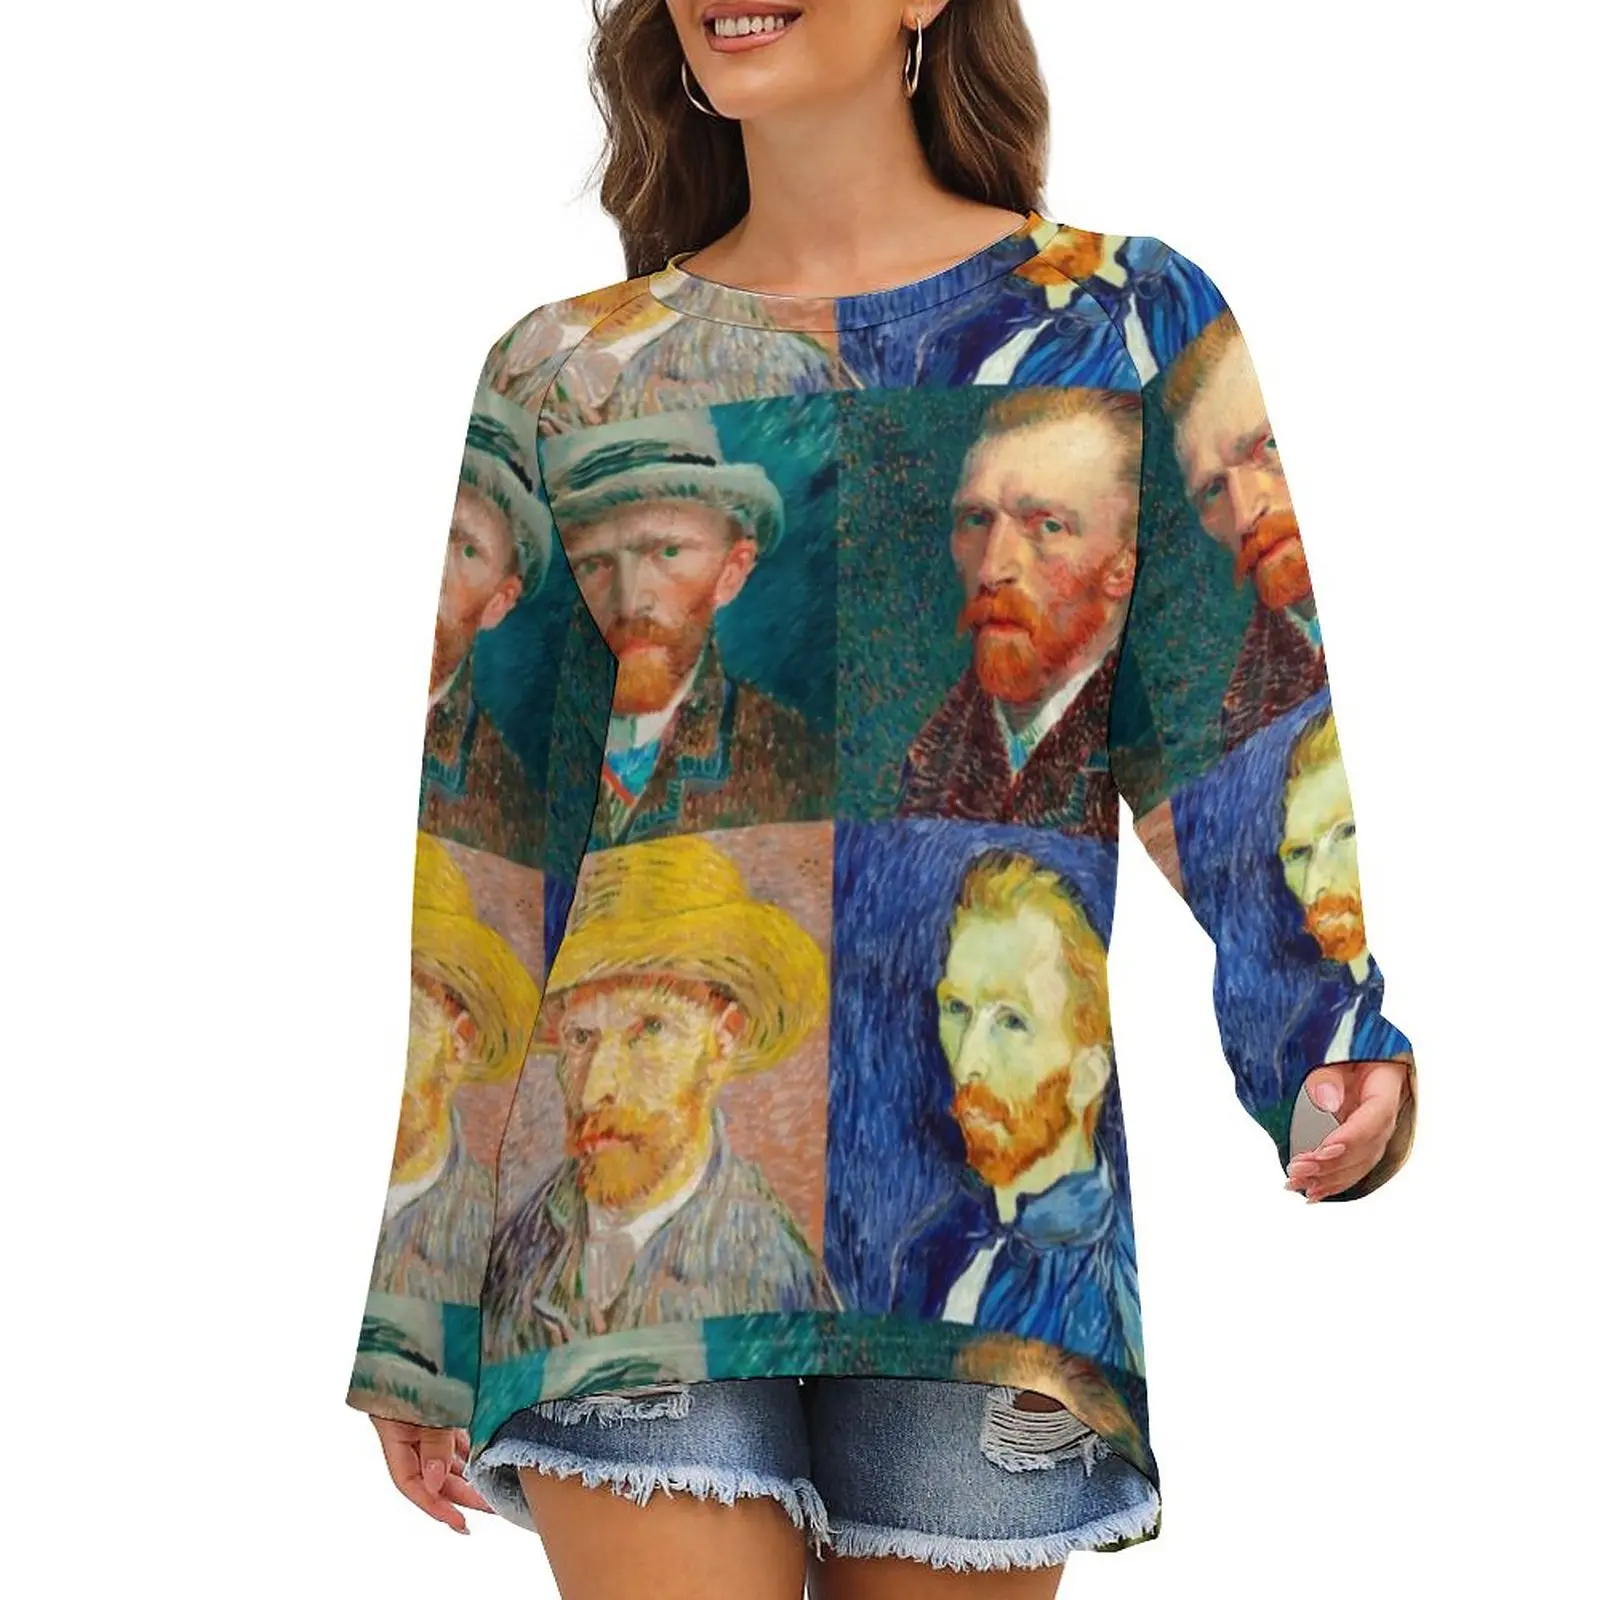 

Van Gogh T Shirt Self-Portrait Collage Simple Long Sleeve T Shirts Casual Oversized Tee Shirt Women Printed Tops Birthday Gift